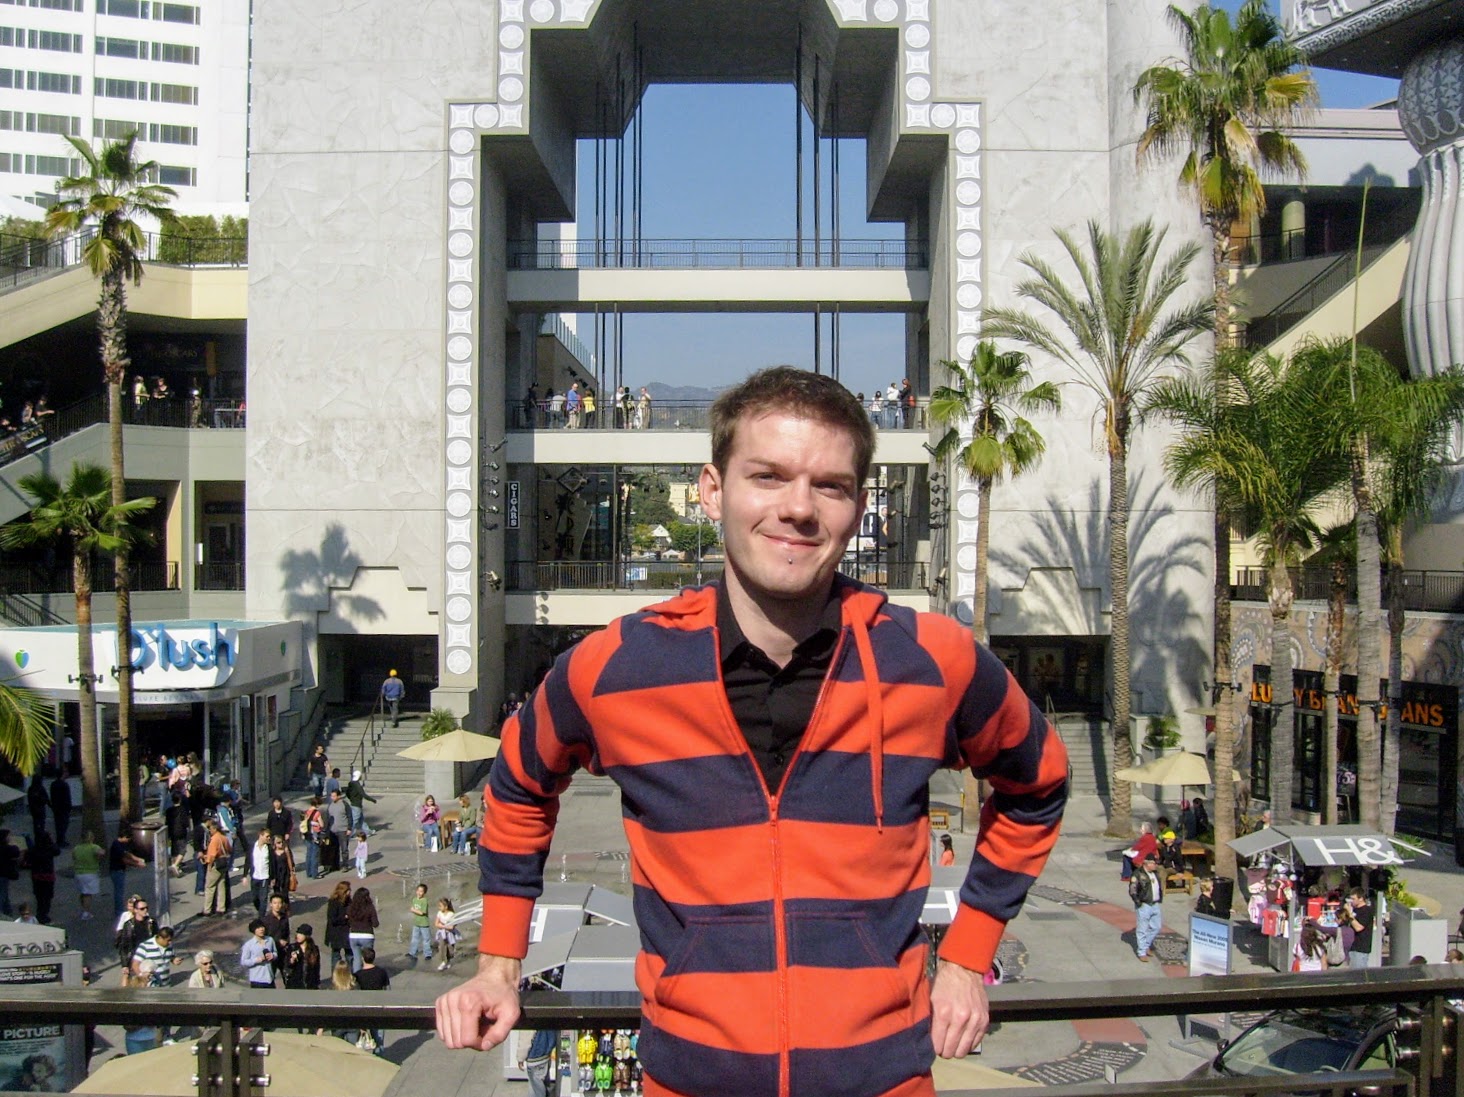 a man standing in front of a building with palm trees and people